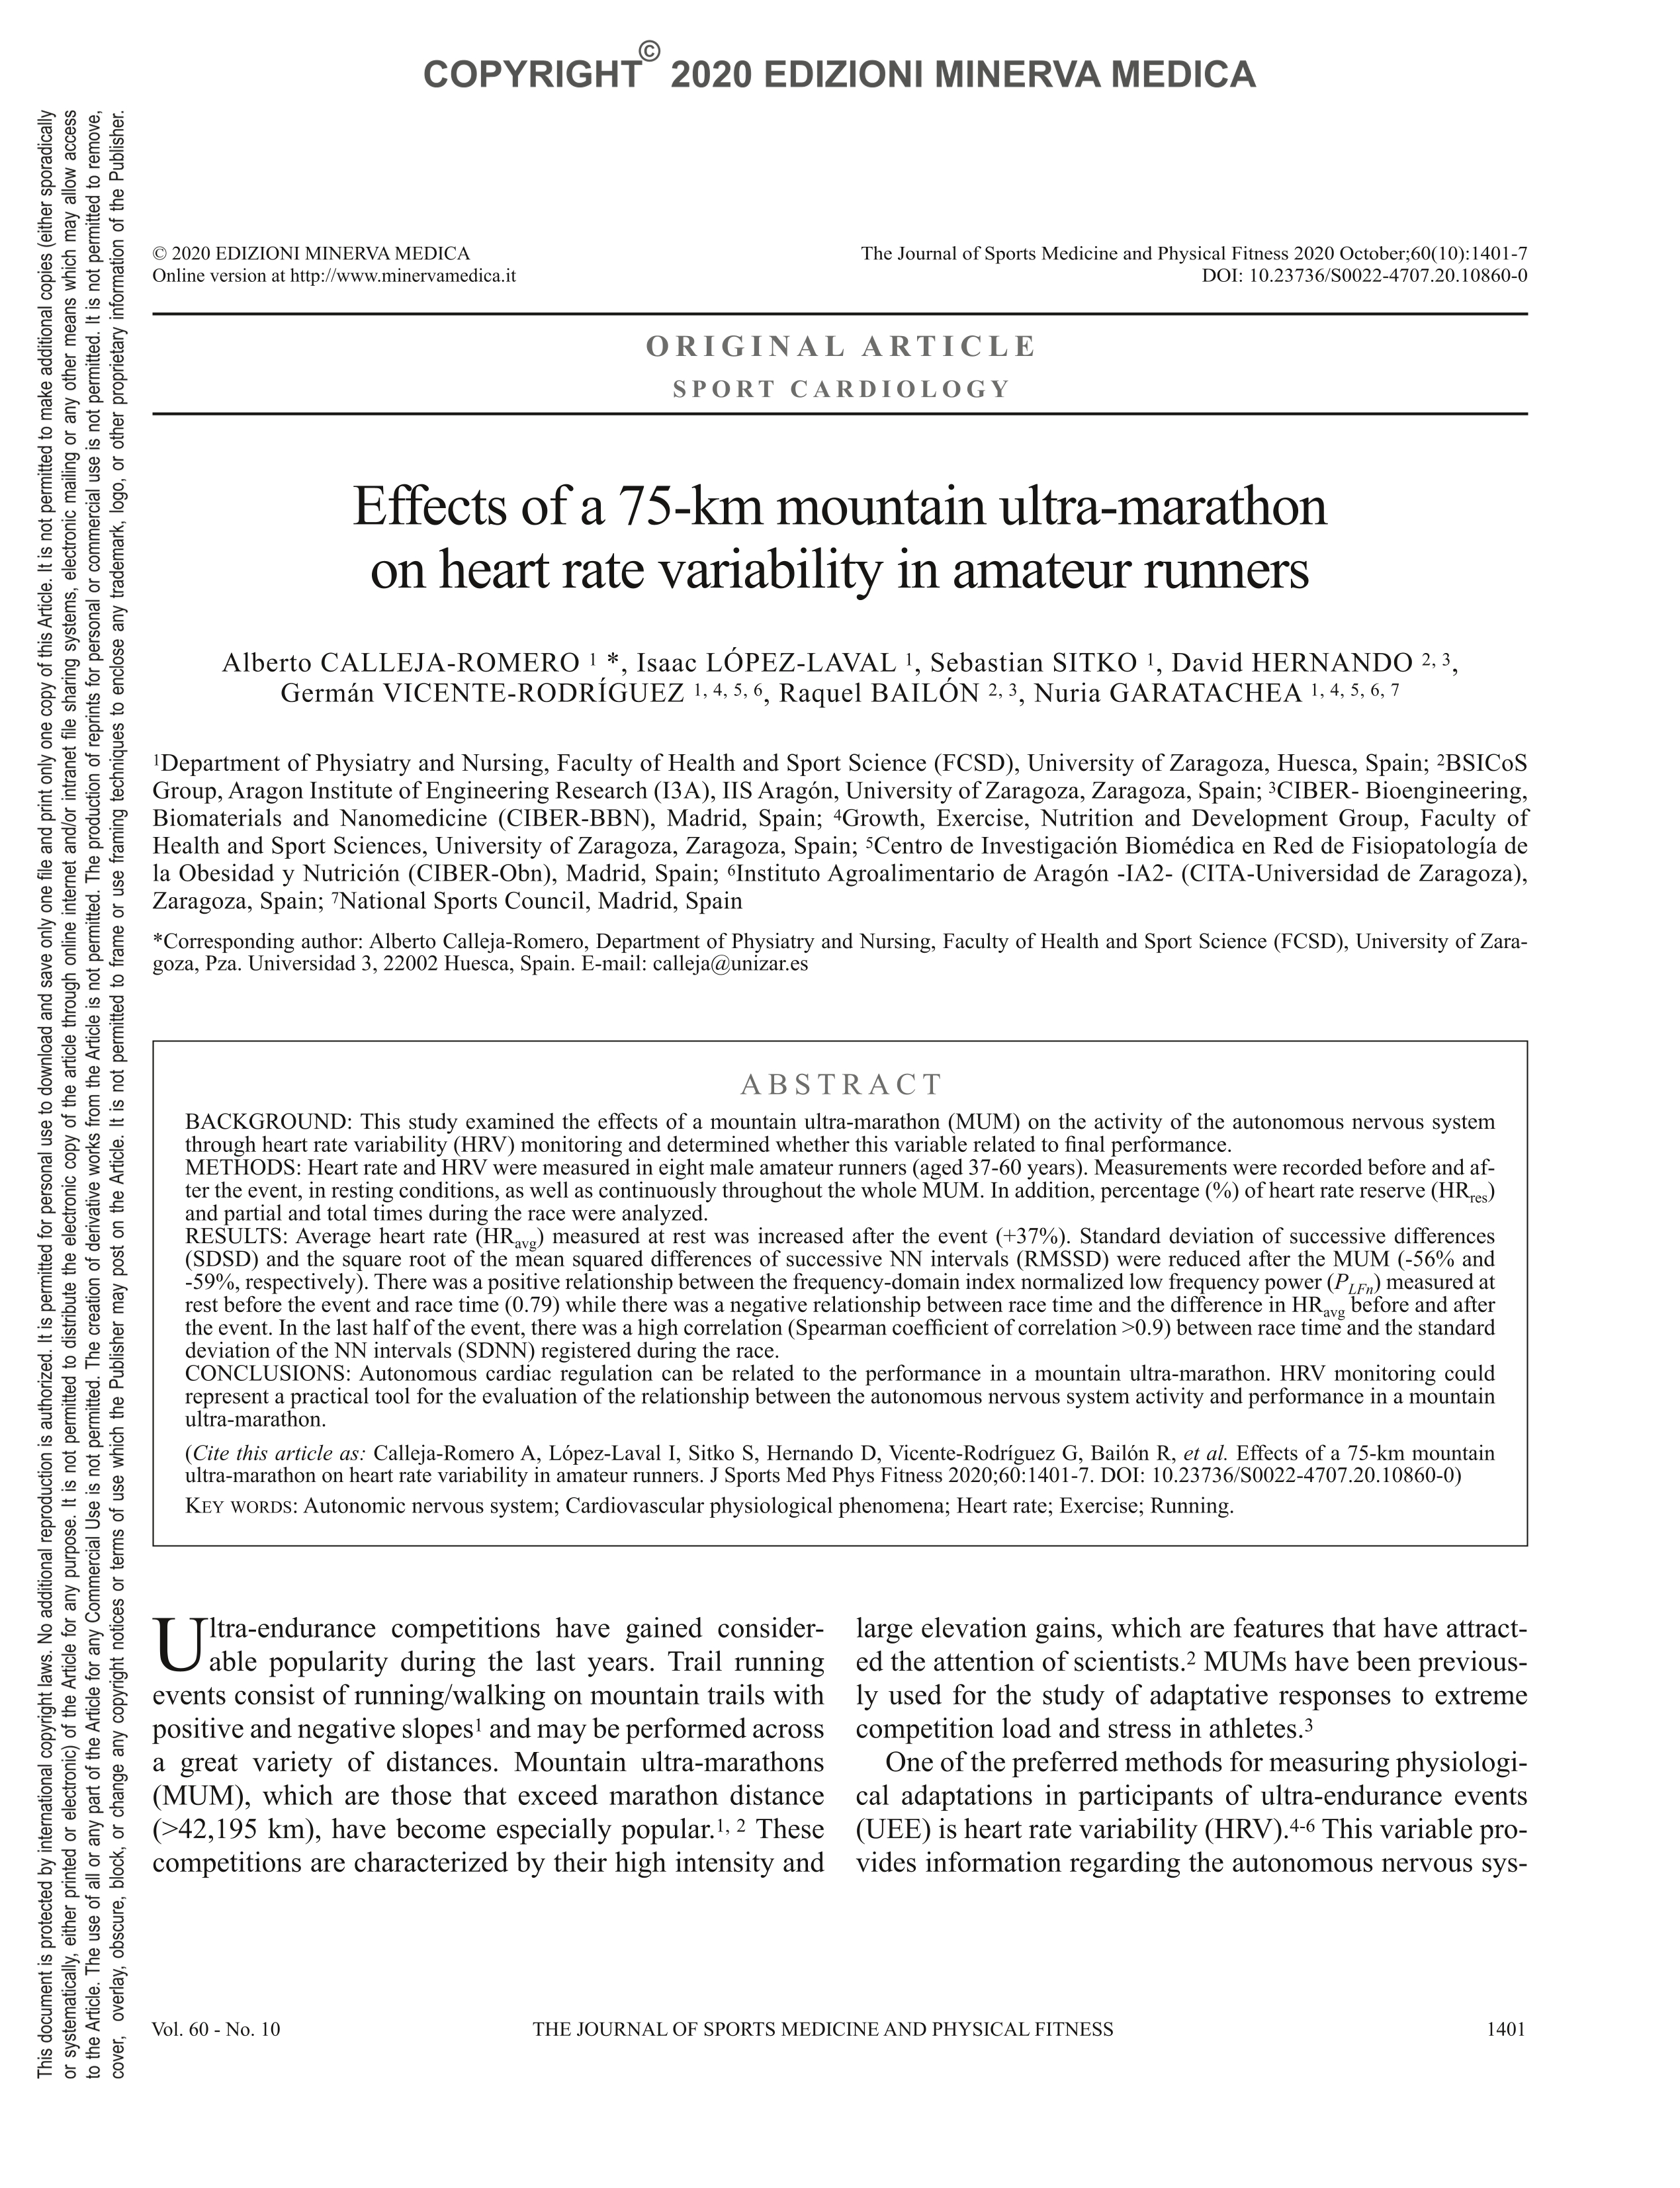 Effects of a 75-km mountain ultra-marathon on heart rate variability in amateur runners